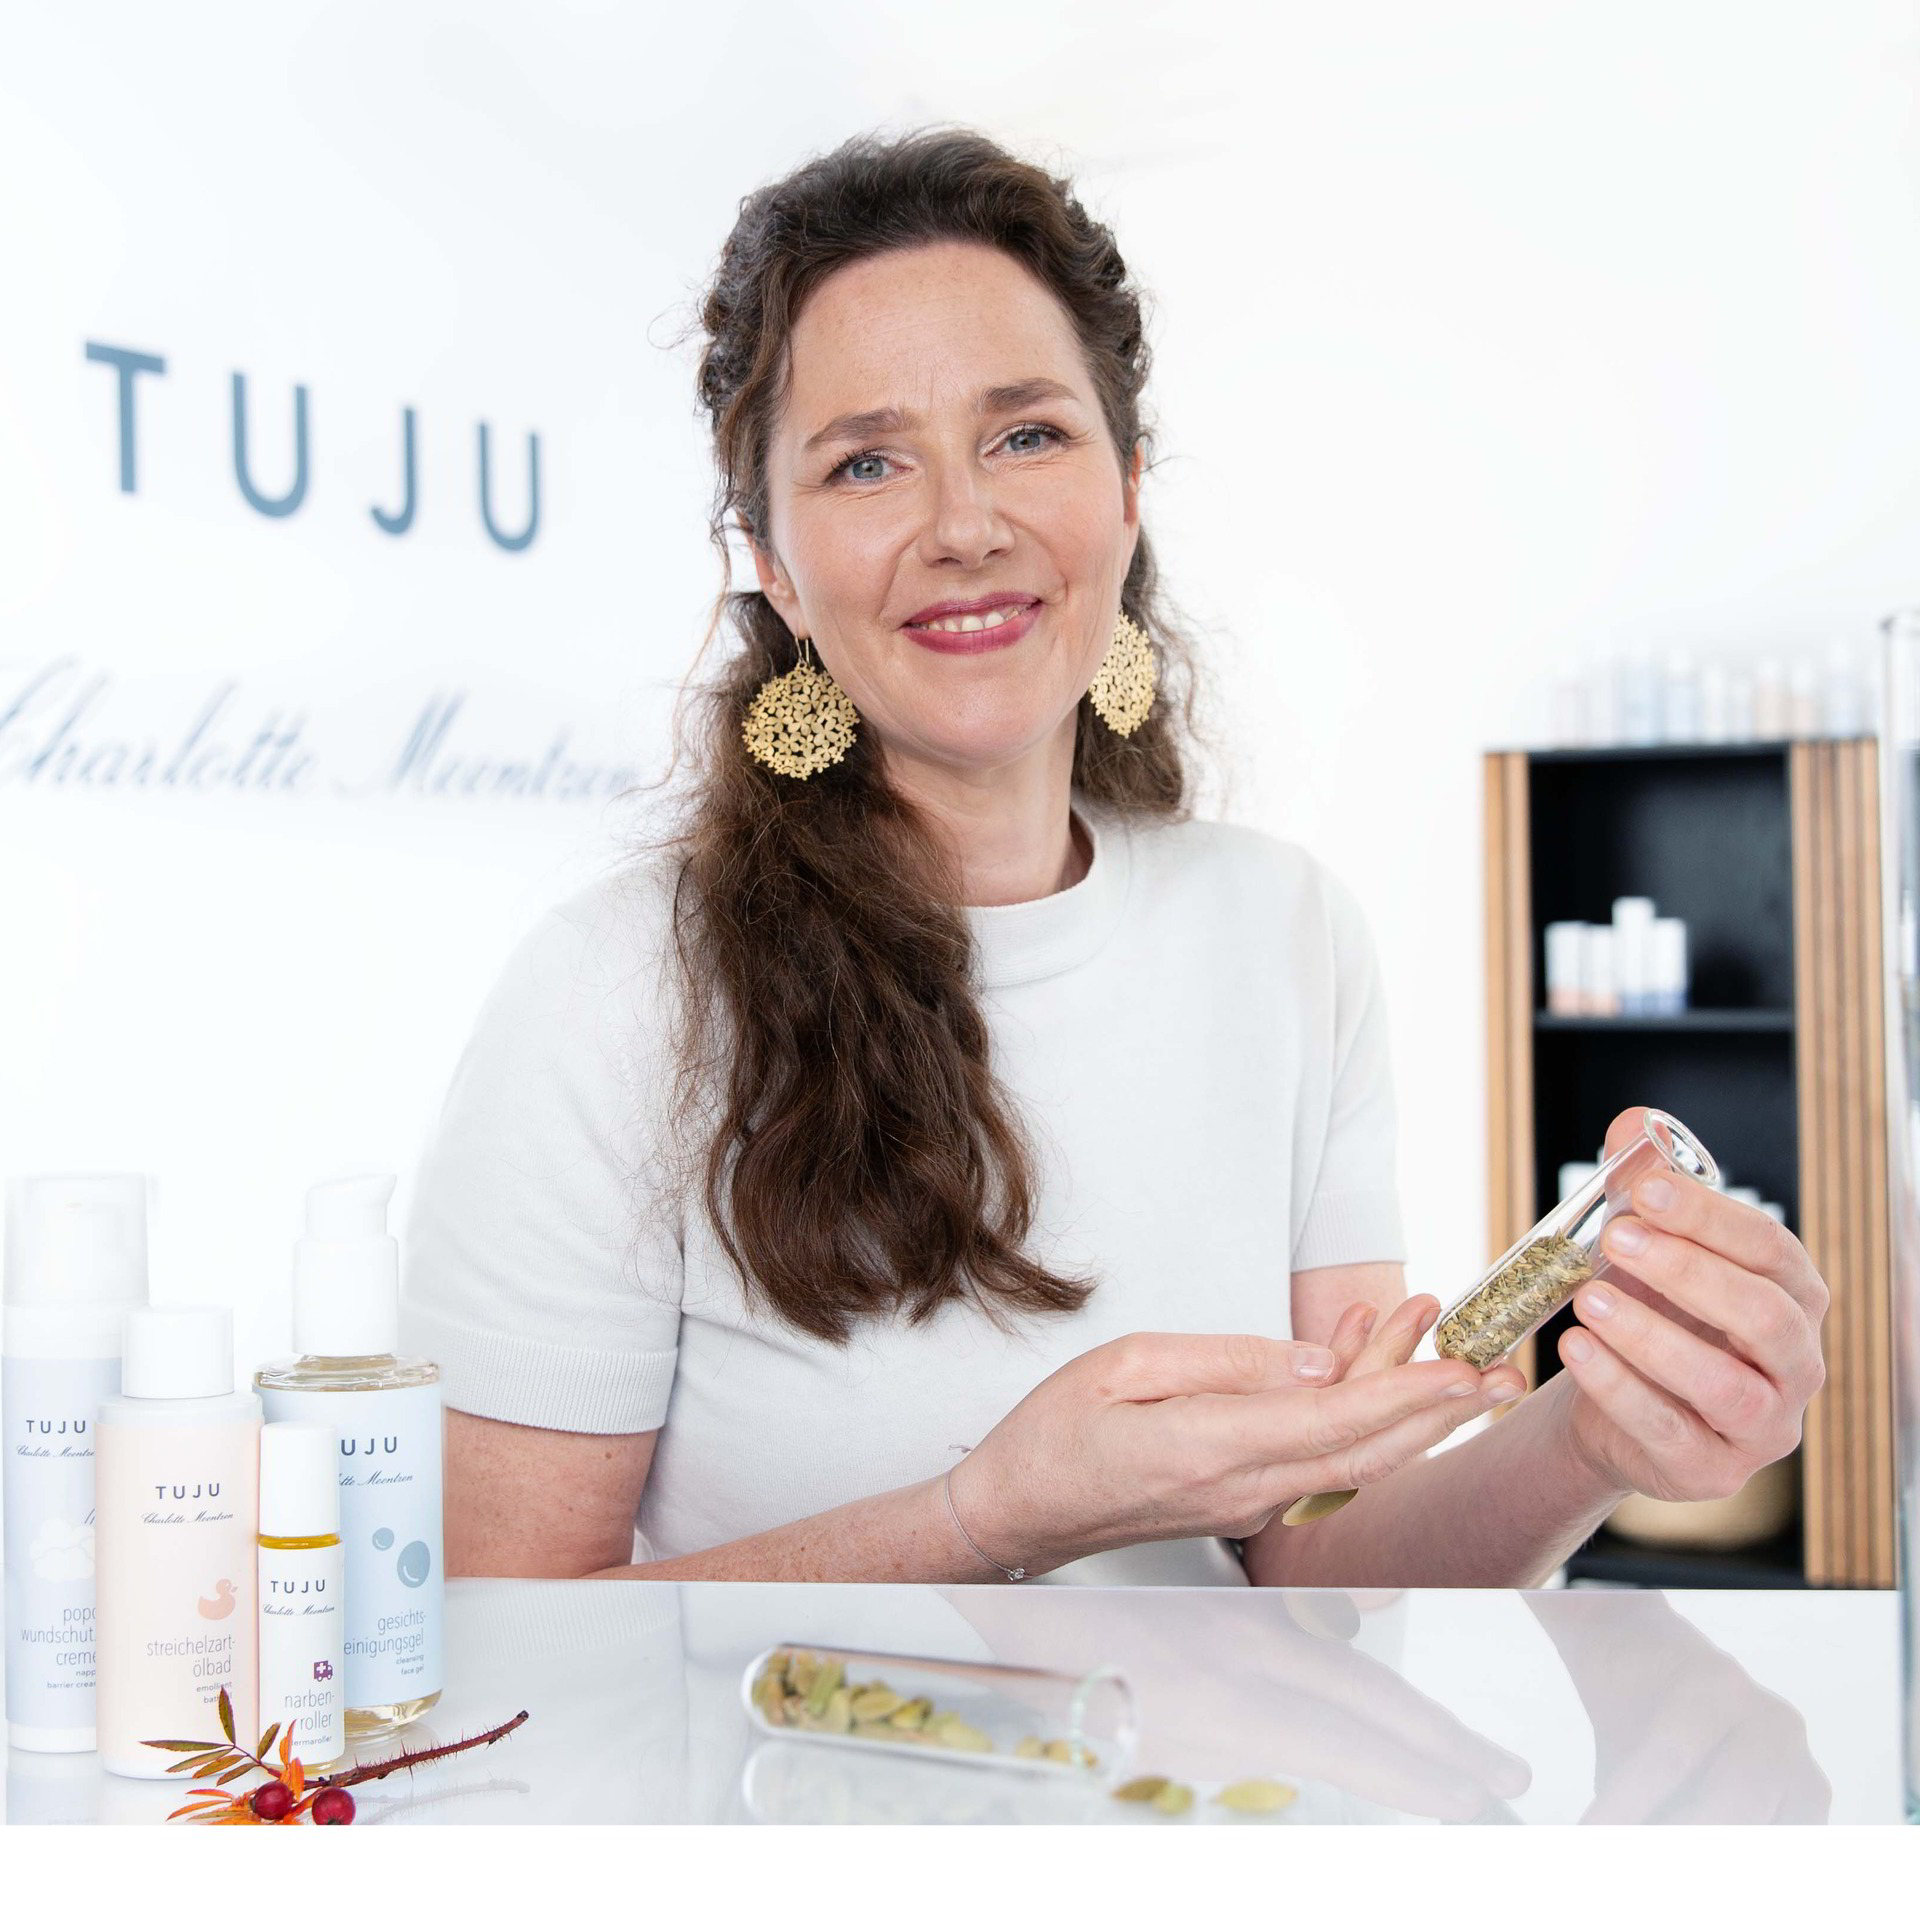 TUJU Feel-Good Body Lotion For a relaxing yet fast care routine